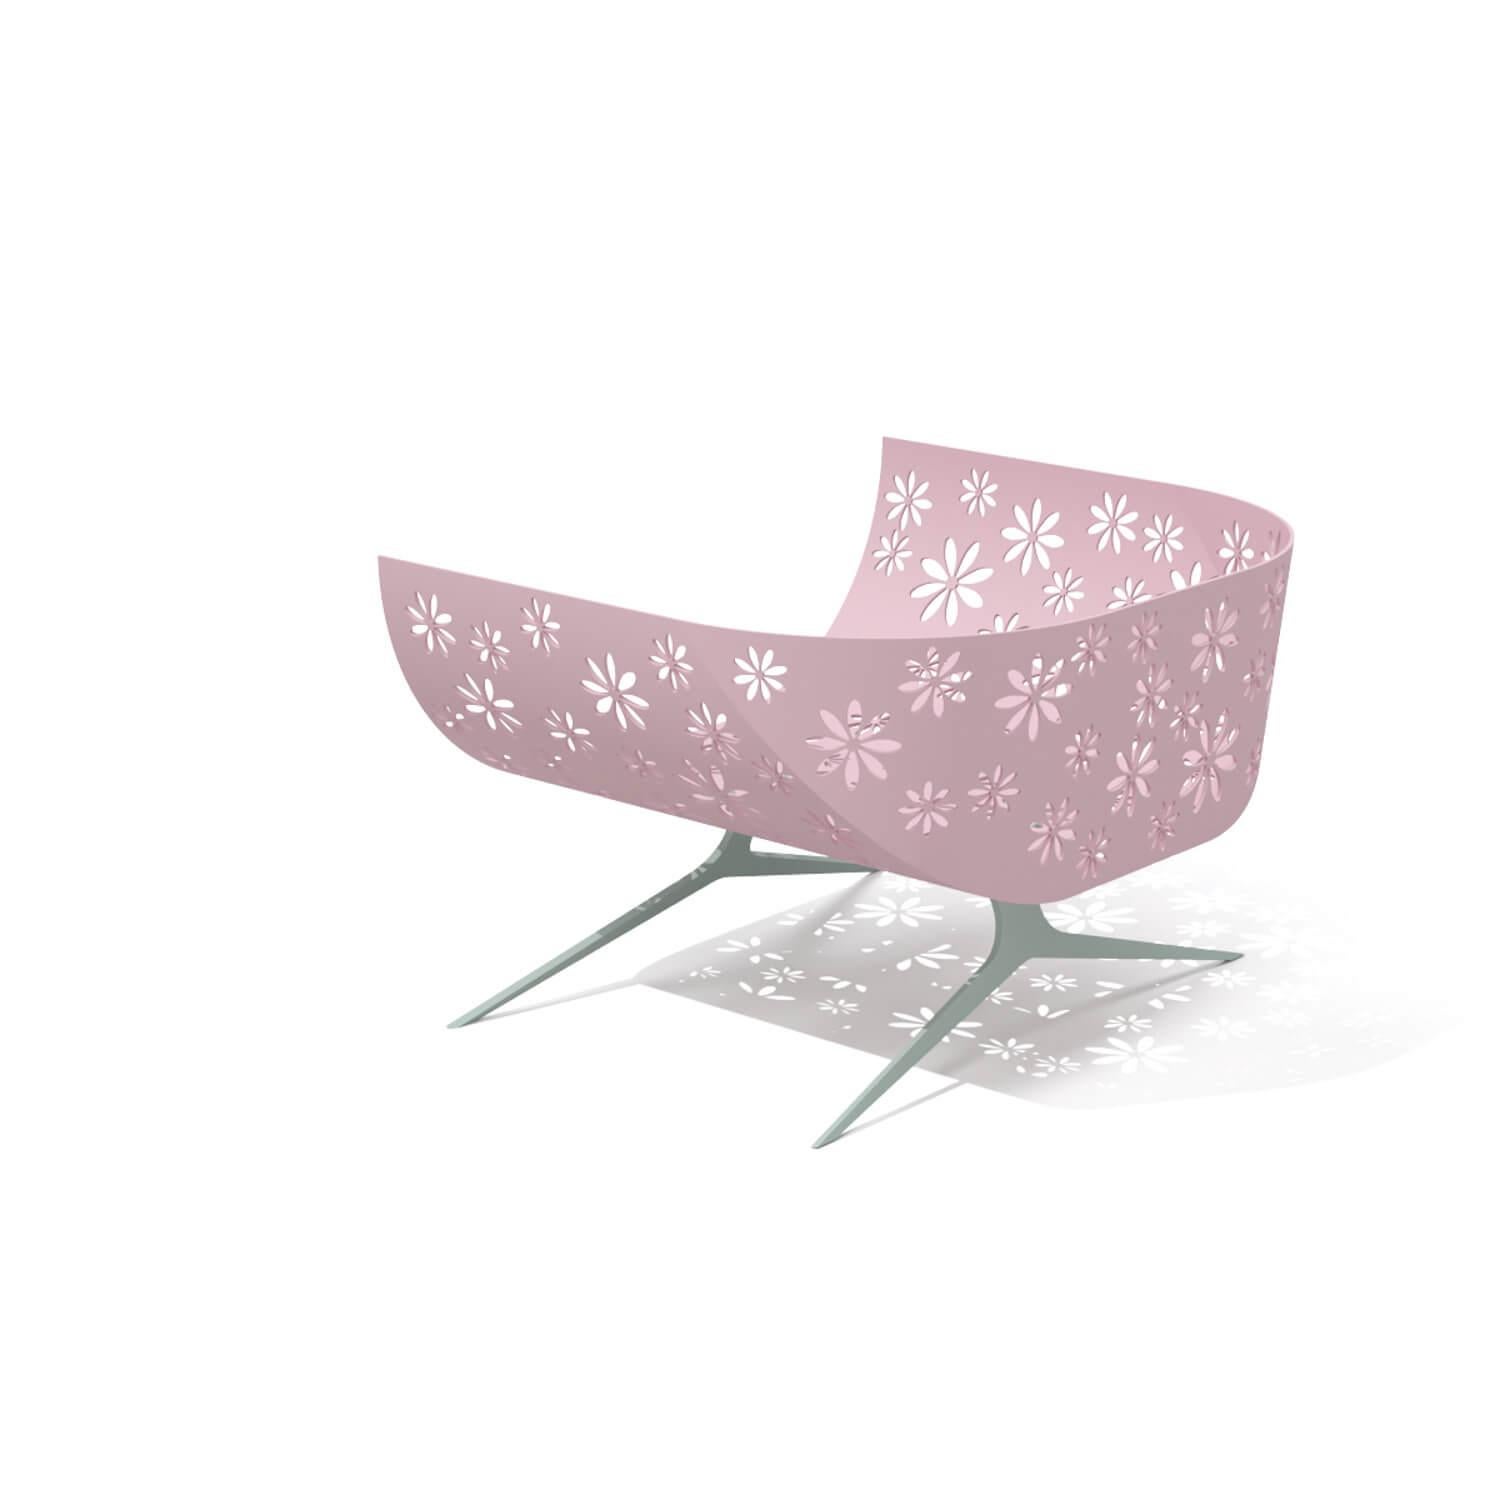 Hand-Crafted Modern Pink & Green Outdoor Lounge Armchair Curved Back with Cutted Flowers For Sale